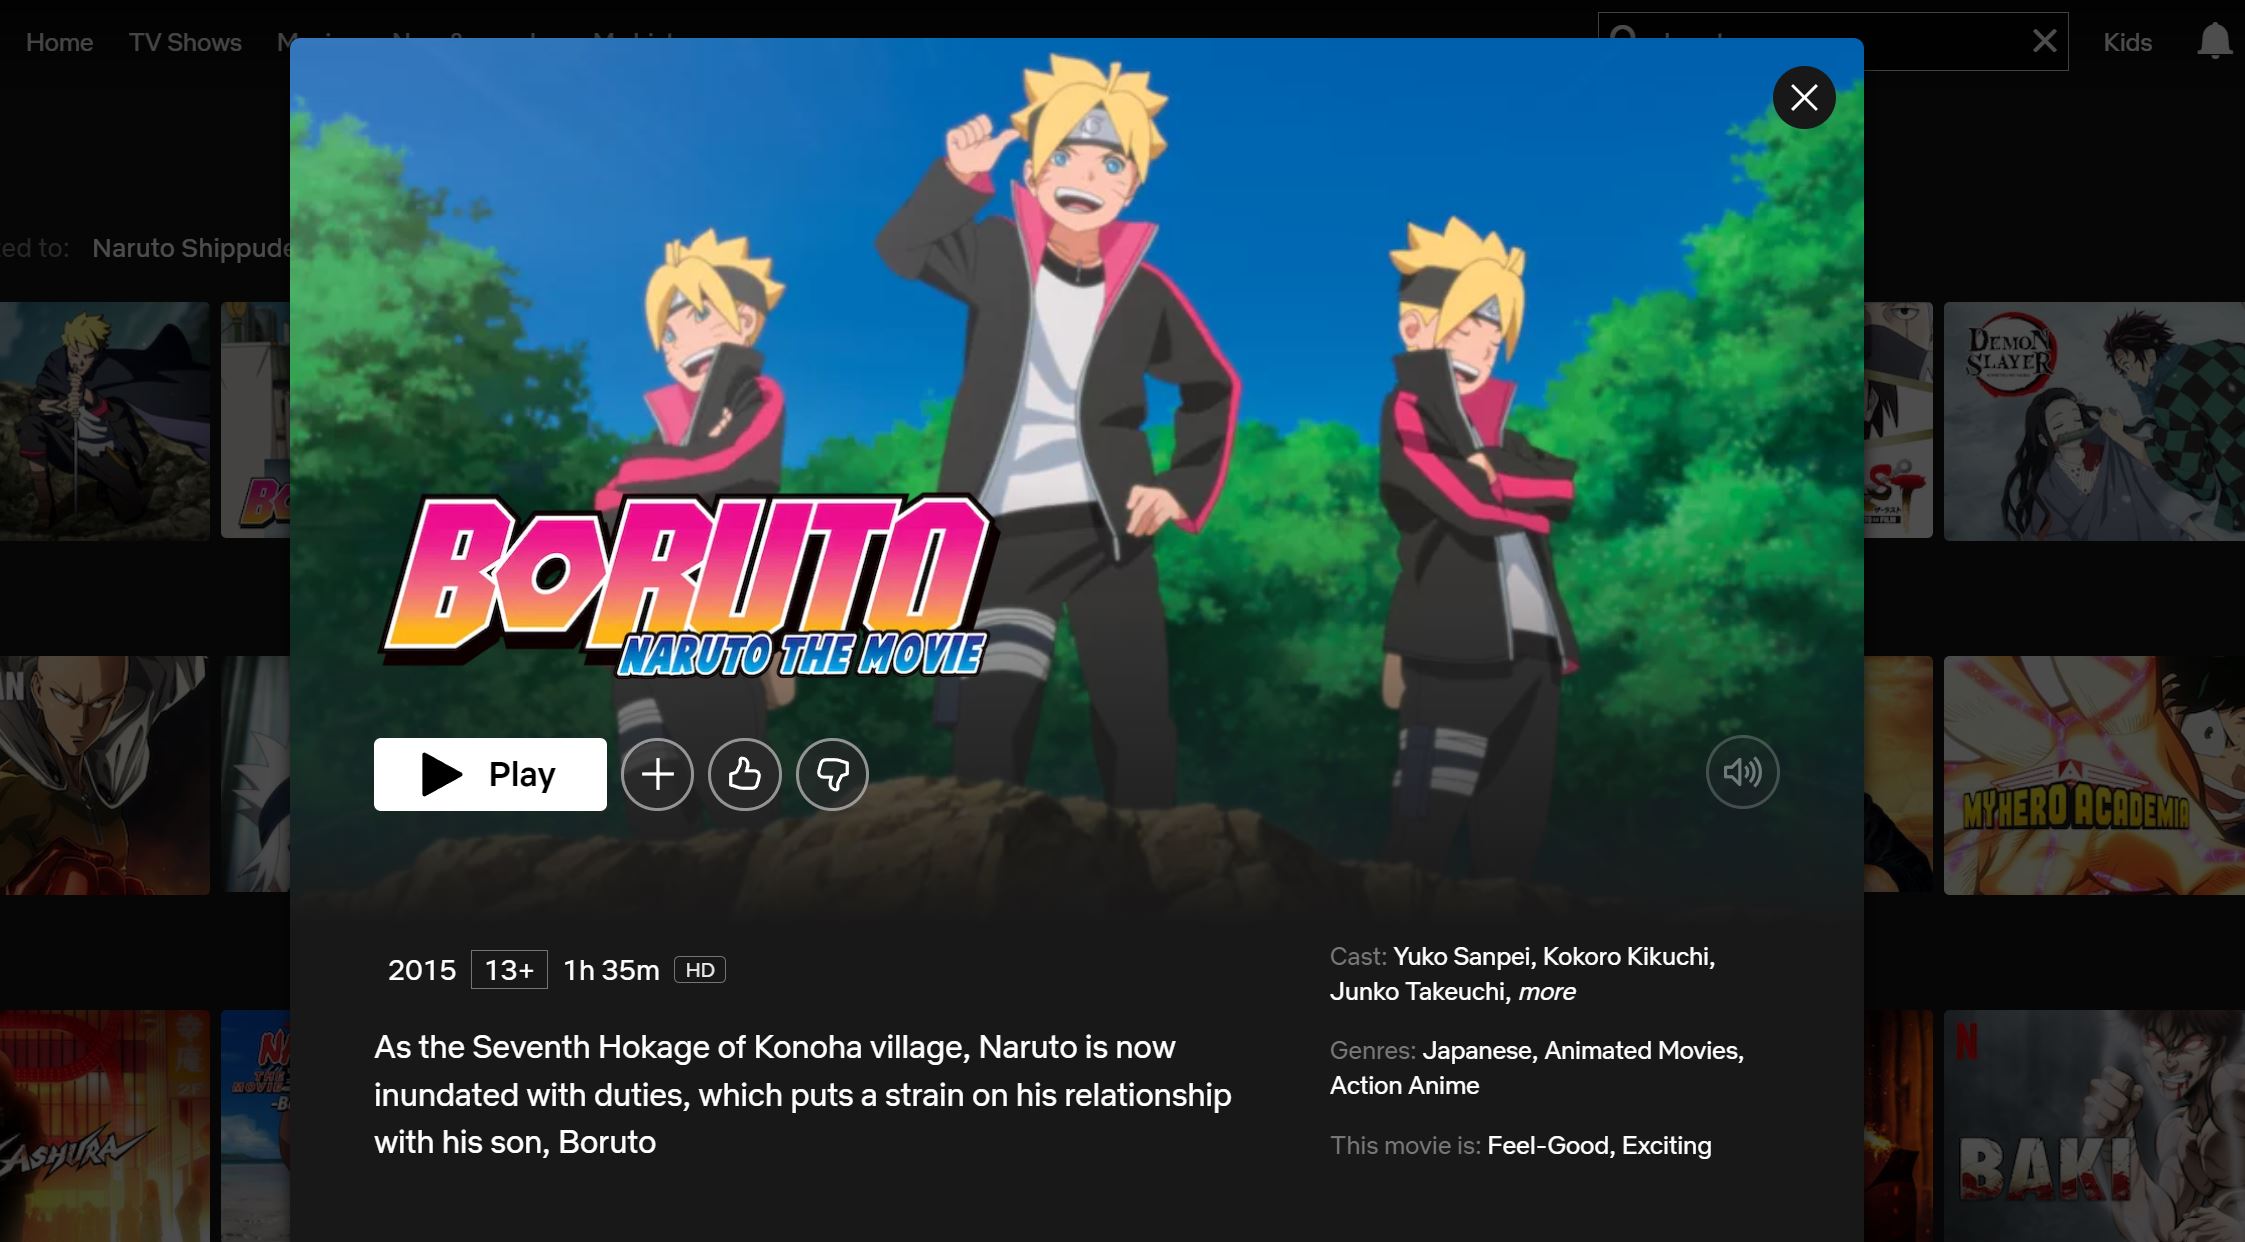 How To Watch Boruto: Naruto On Netflix In 2023